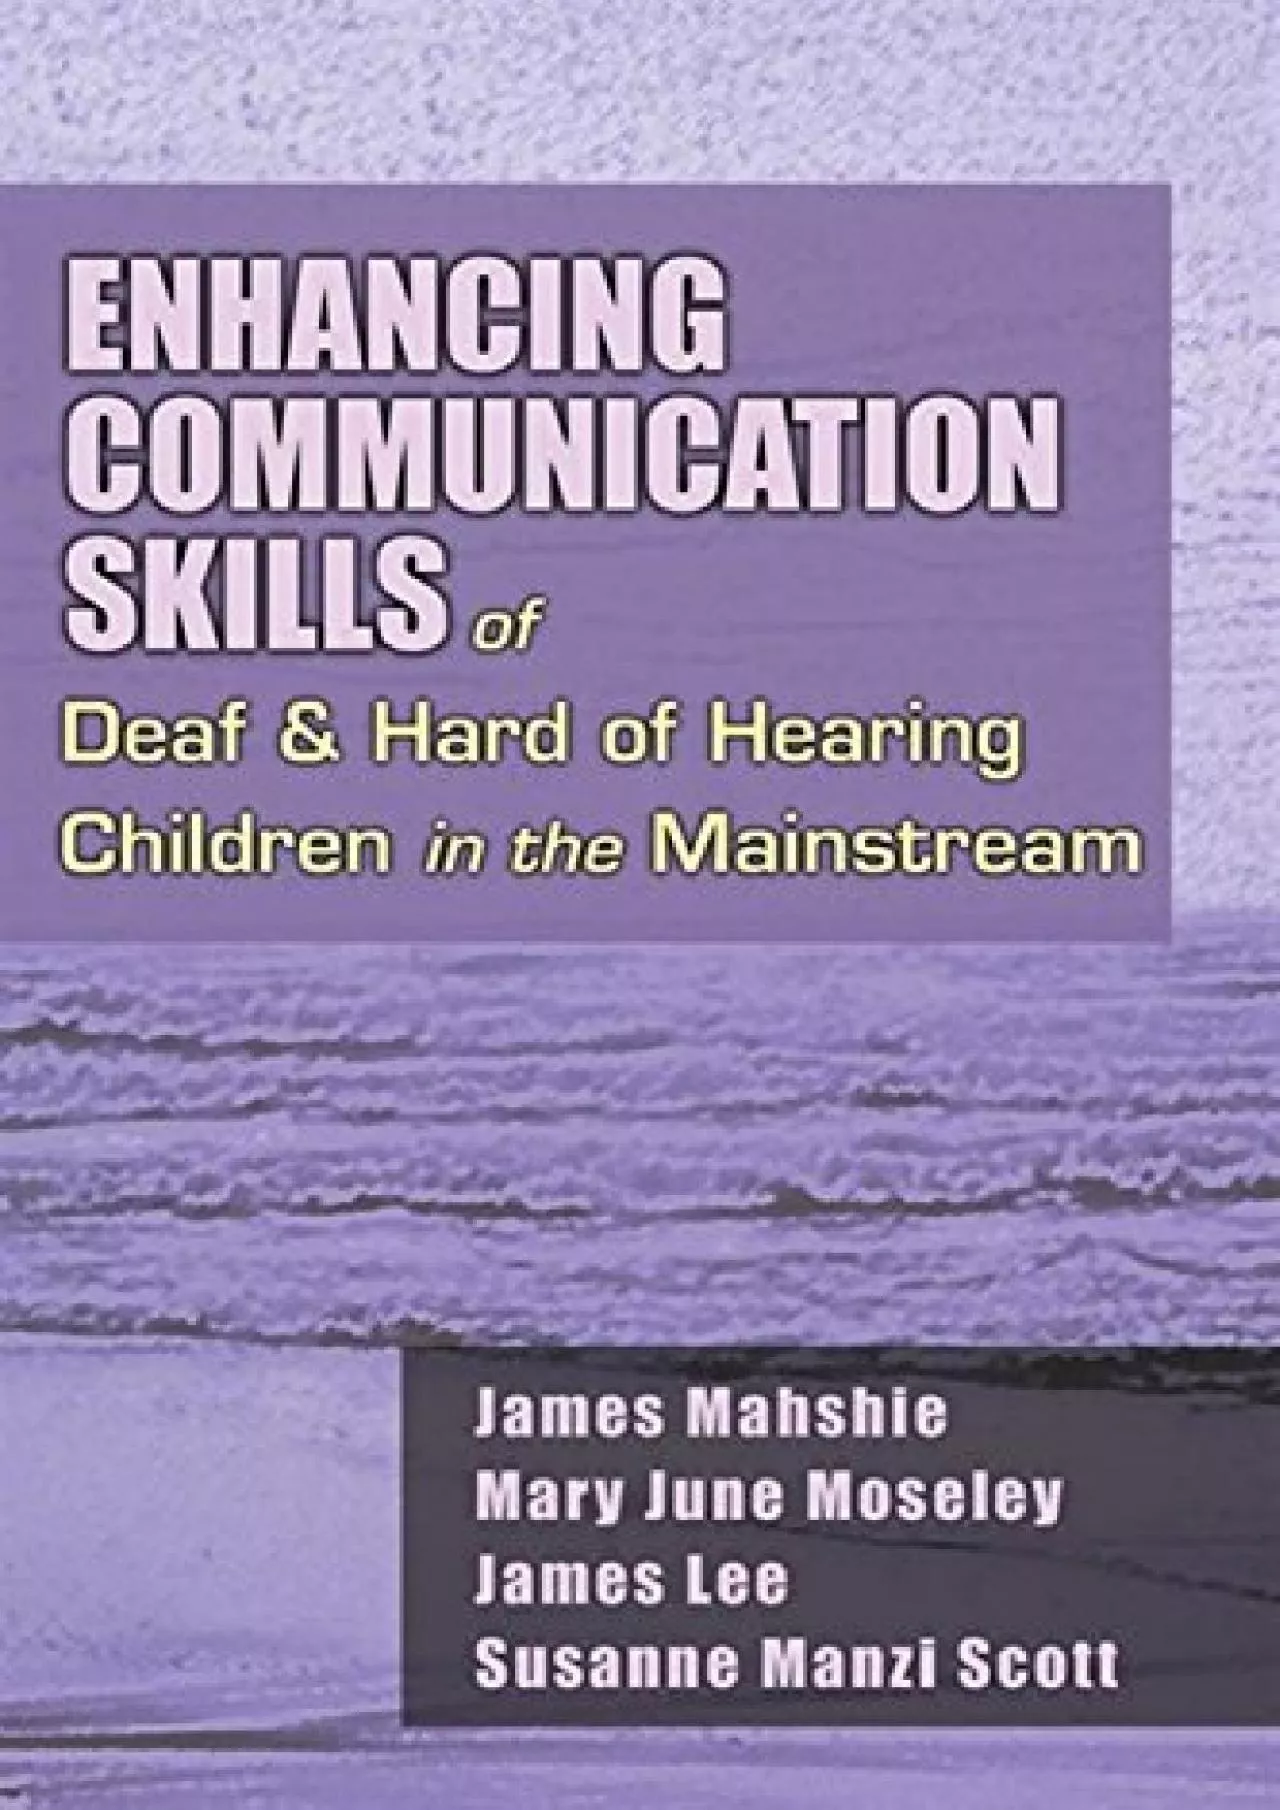 (BOOK)-Enhancing Communication Skills of Deaf and Hard of Hearing Children in the Mainstream